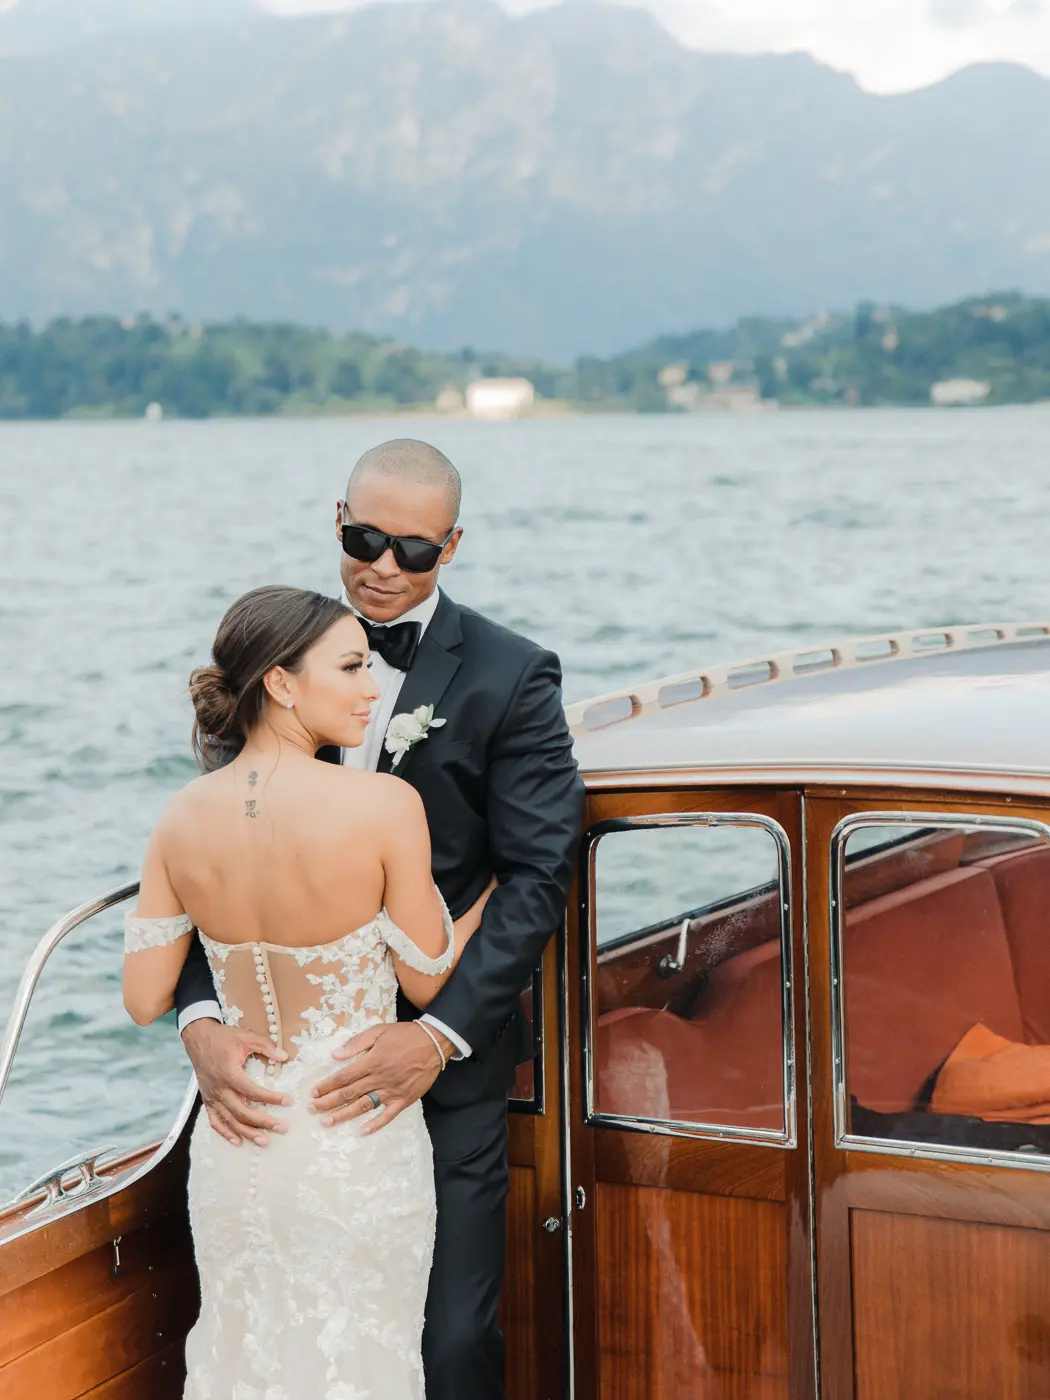 A candid moment captured as the newlyweds share hugs on a boat with the enchanting backdrop of Lake Como's azure waters